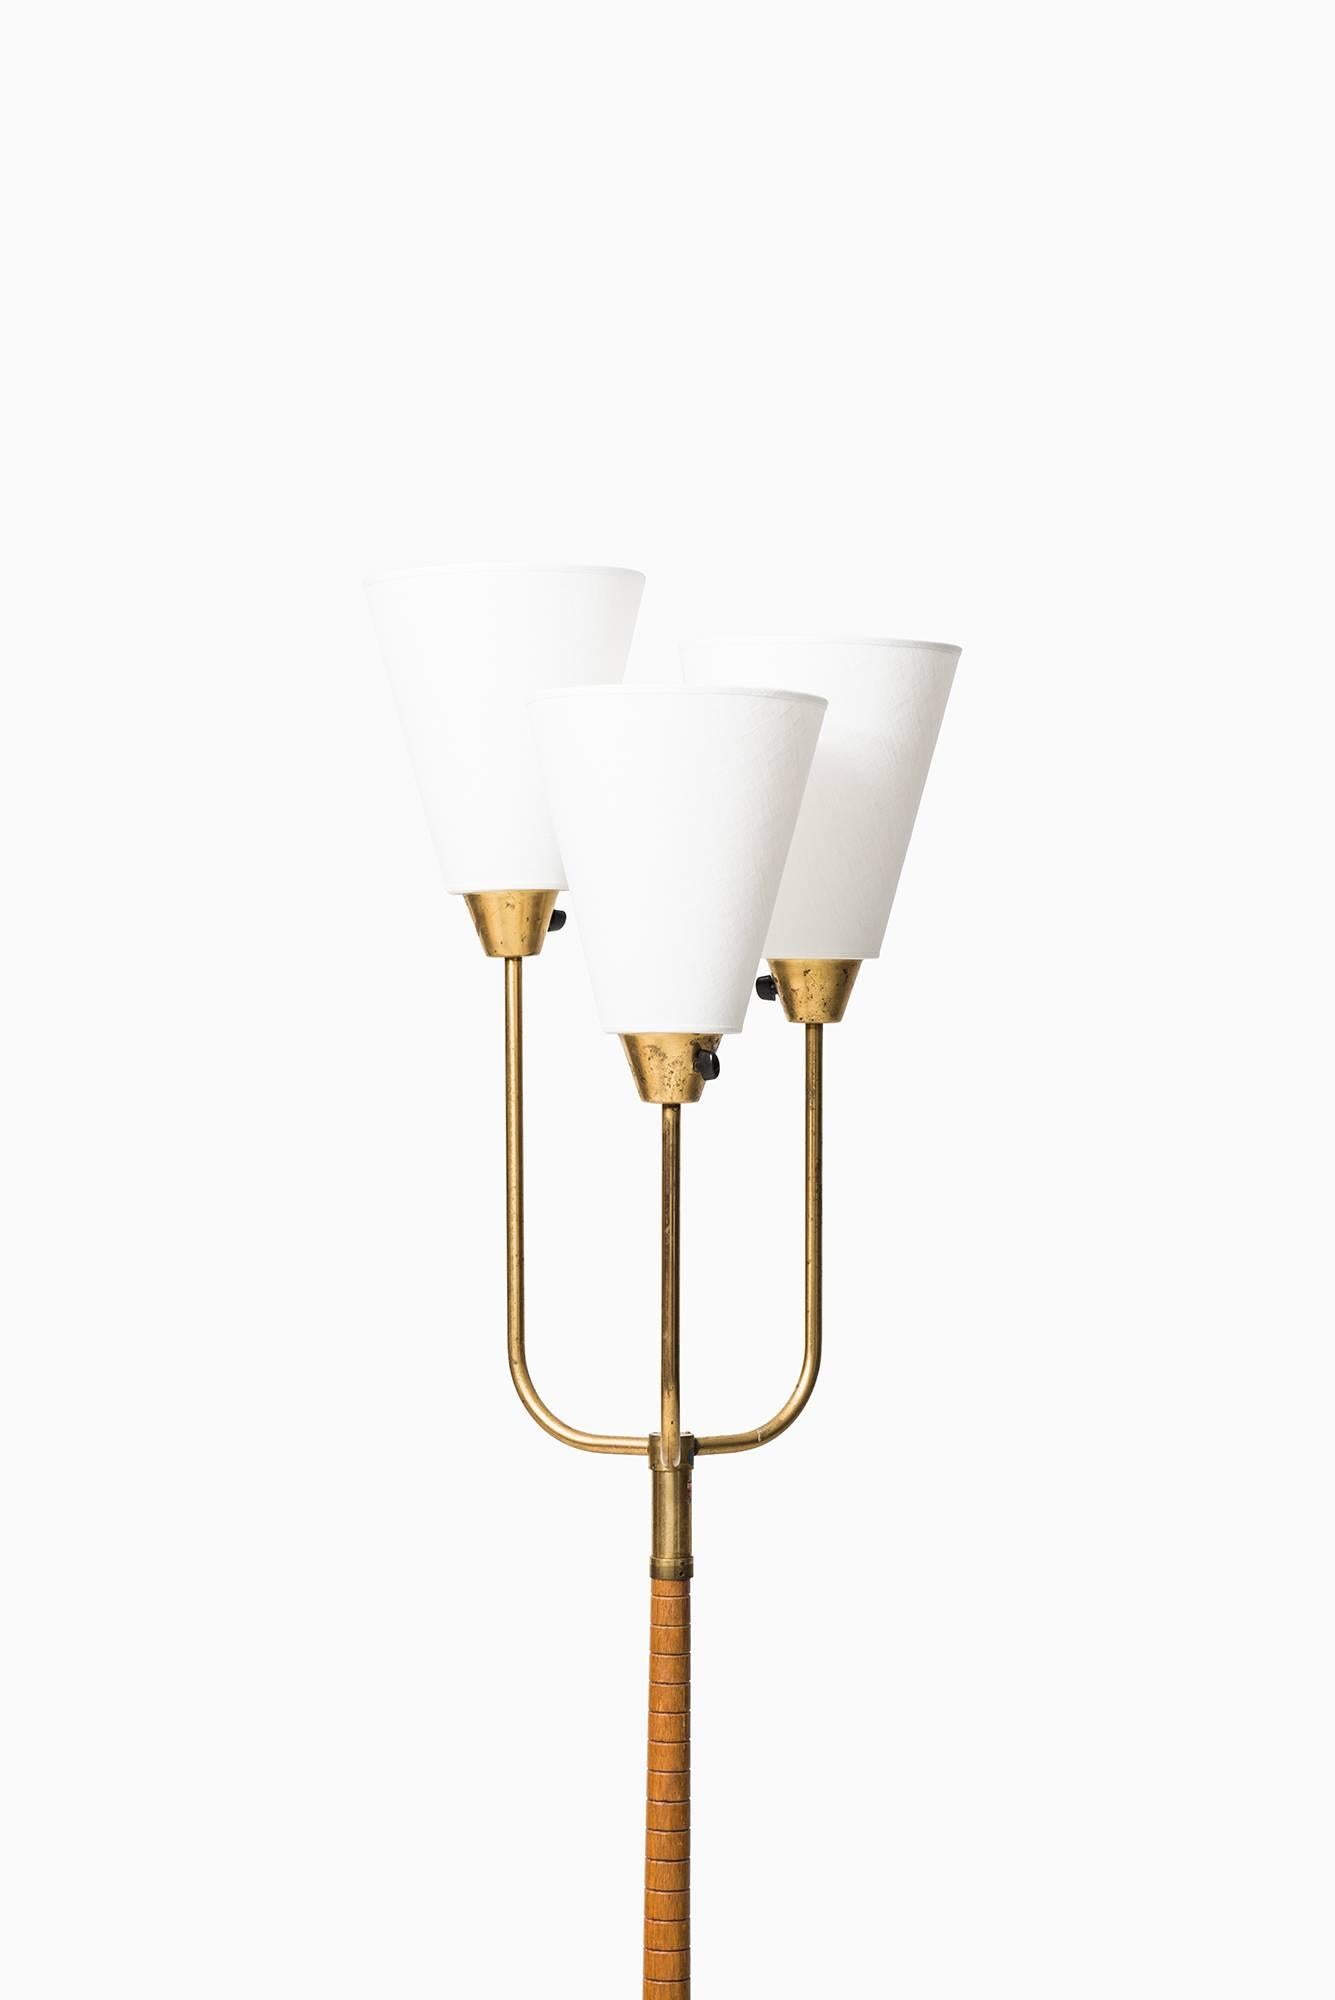 Brass Midcentury Uplight with Three Arms Produced in Sweden